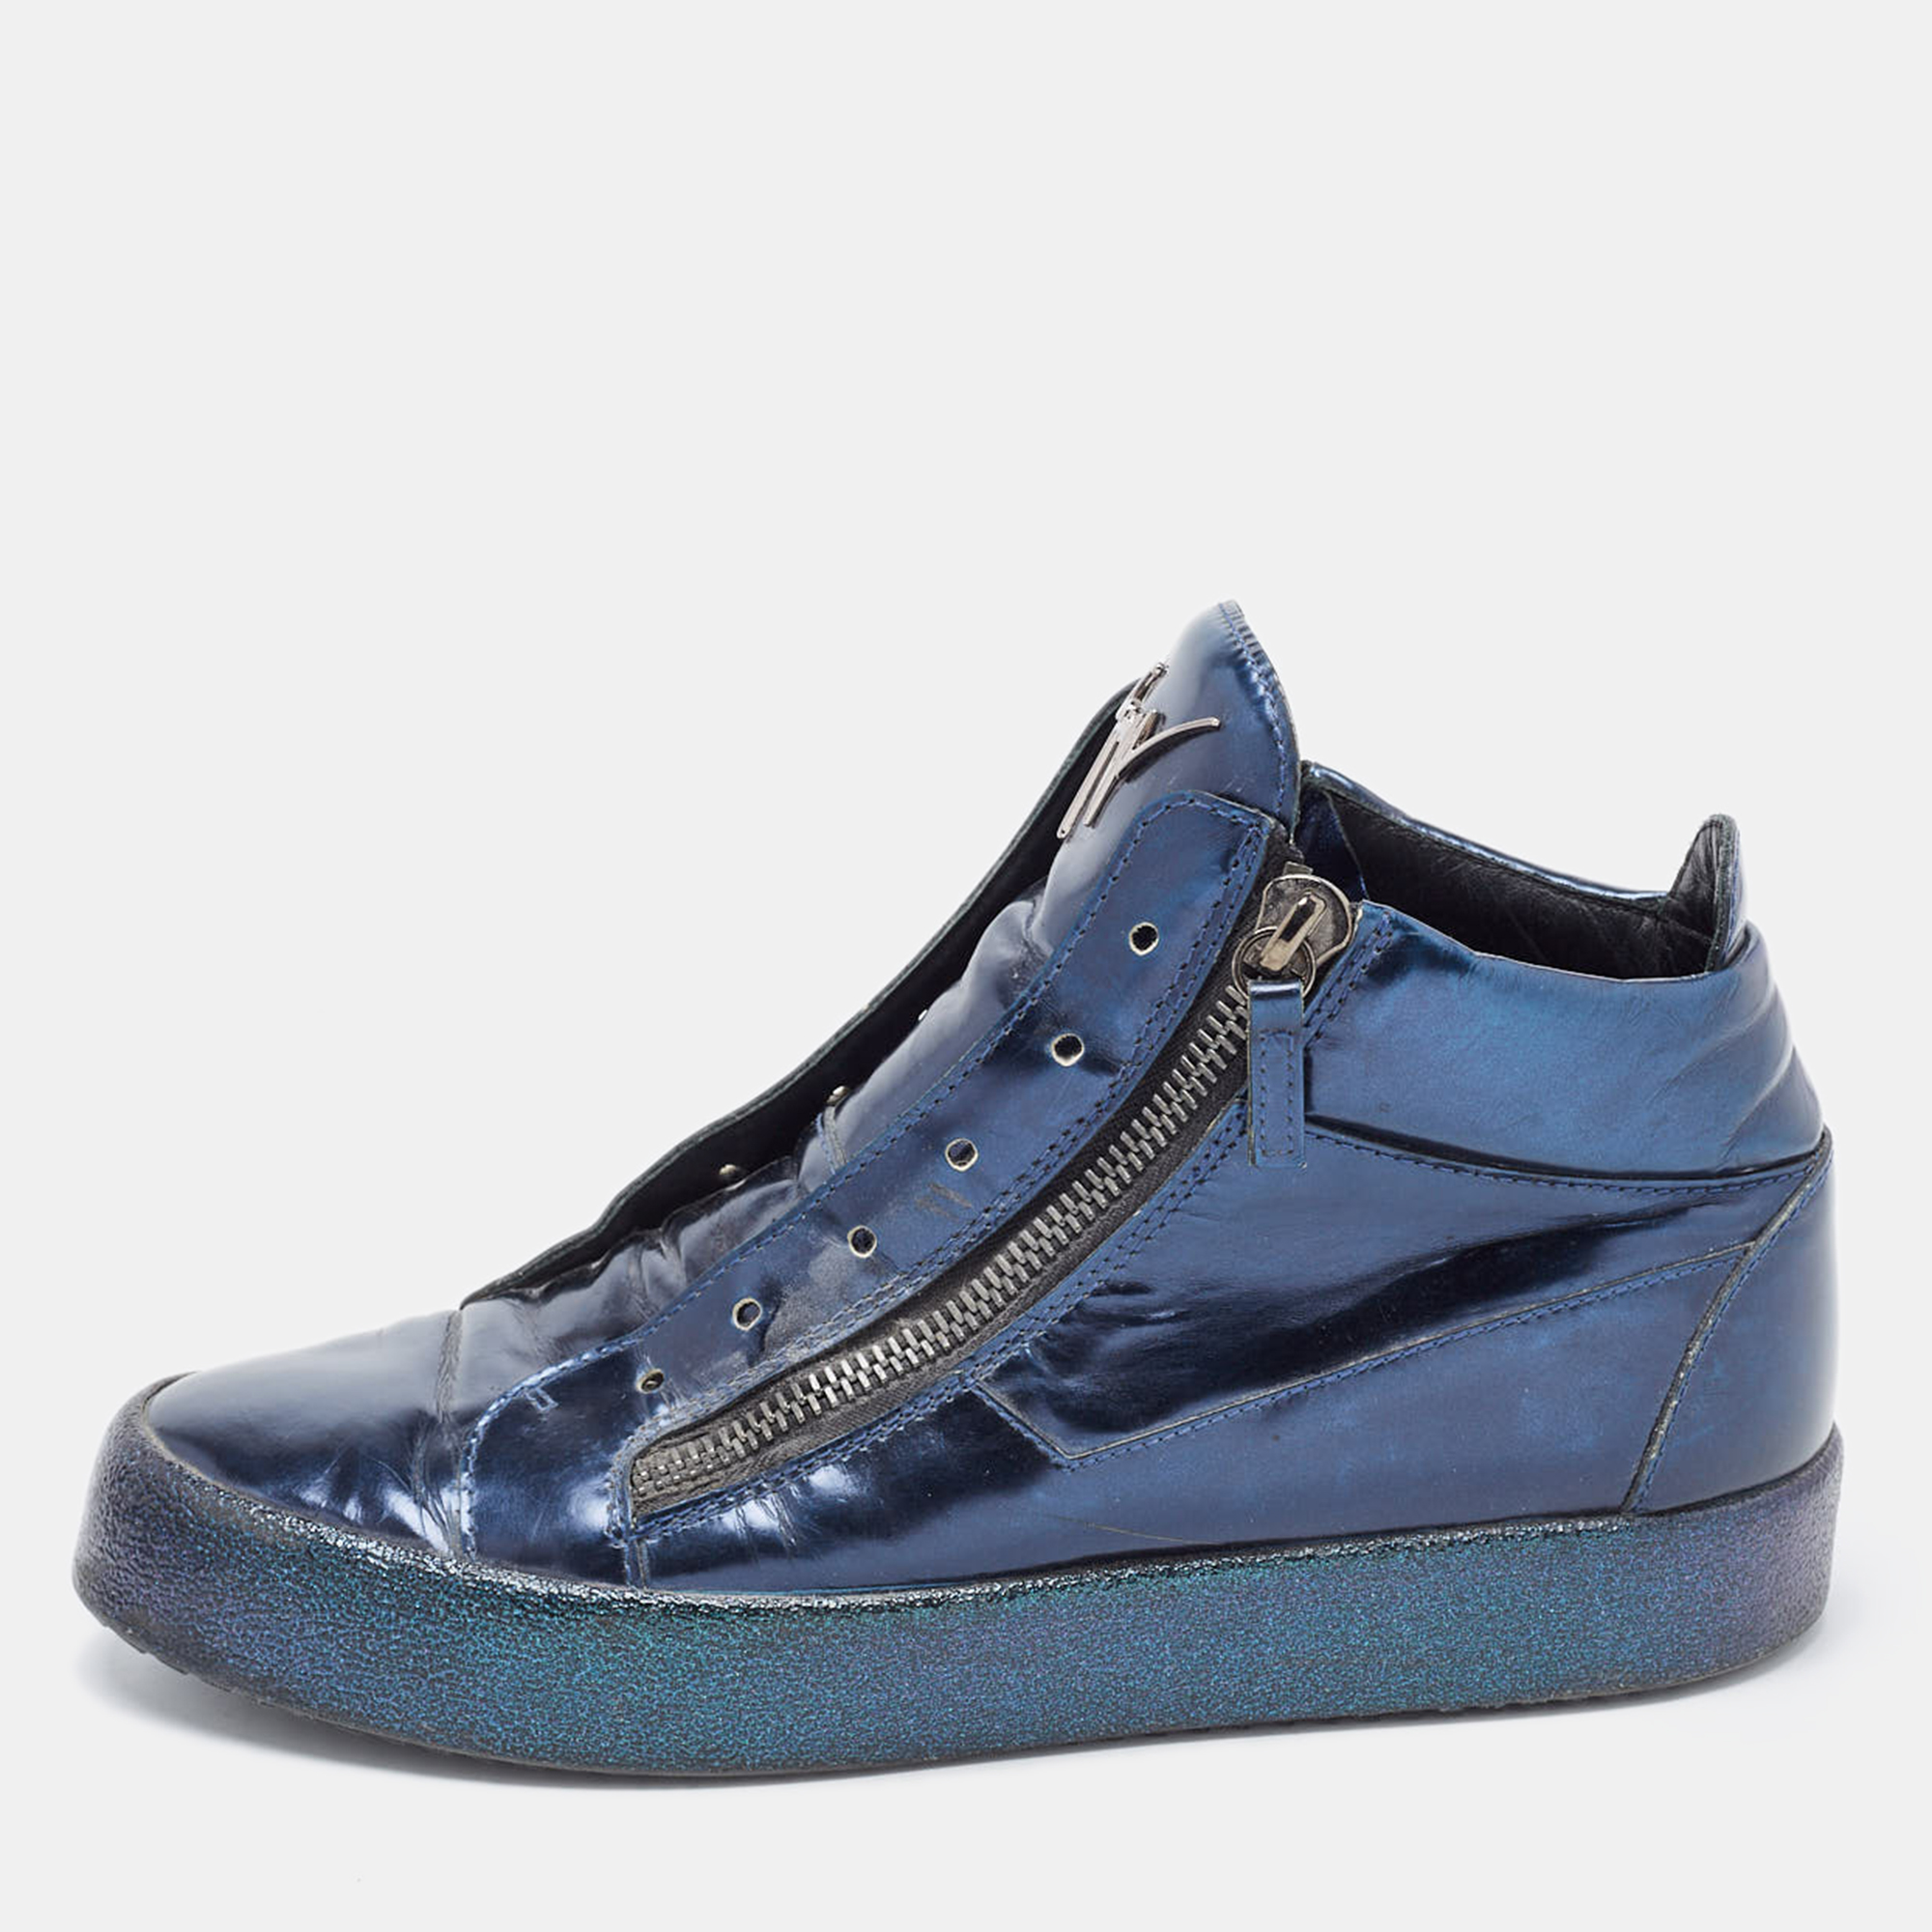 Pre-owned Giuseppe Zanotti Metallic Blue Leather High Top Sneakers Size 42